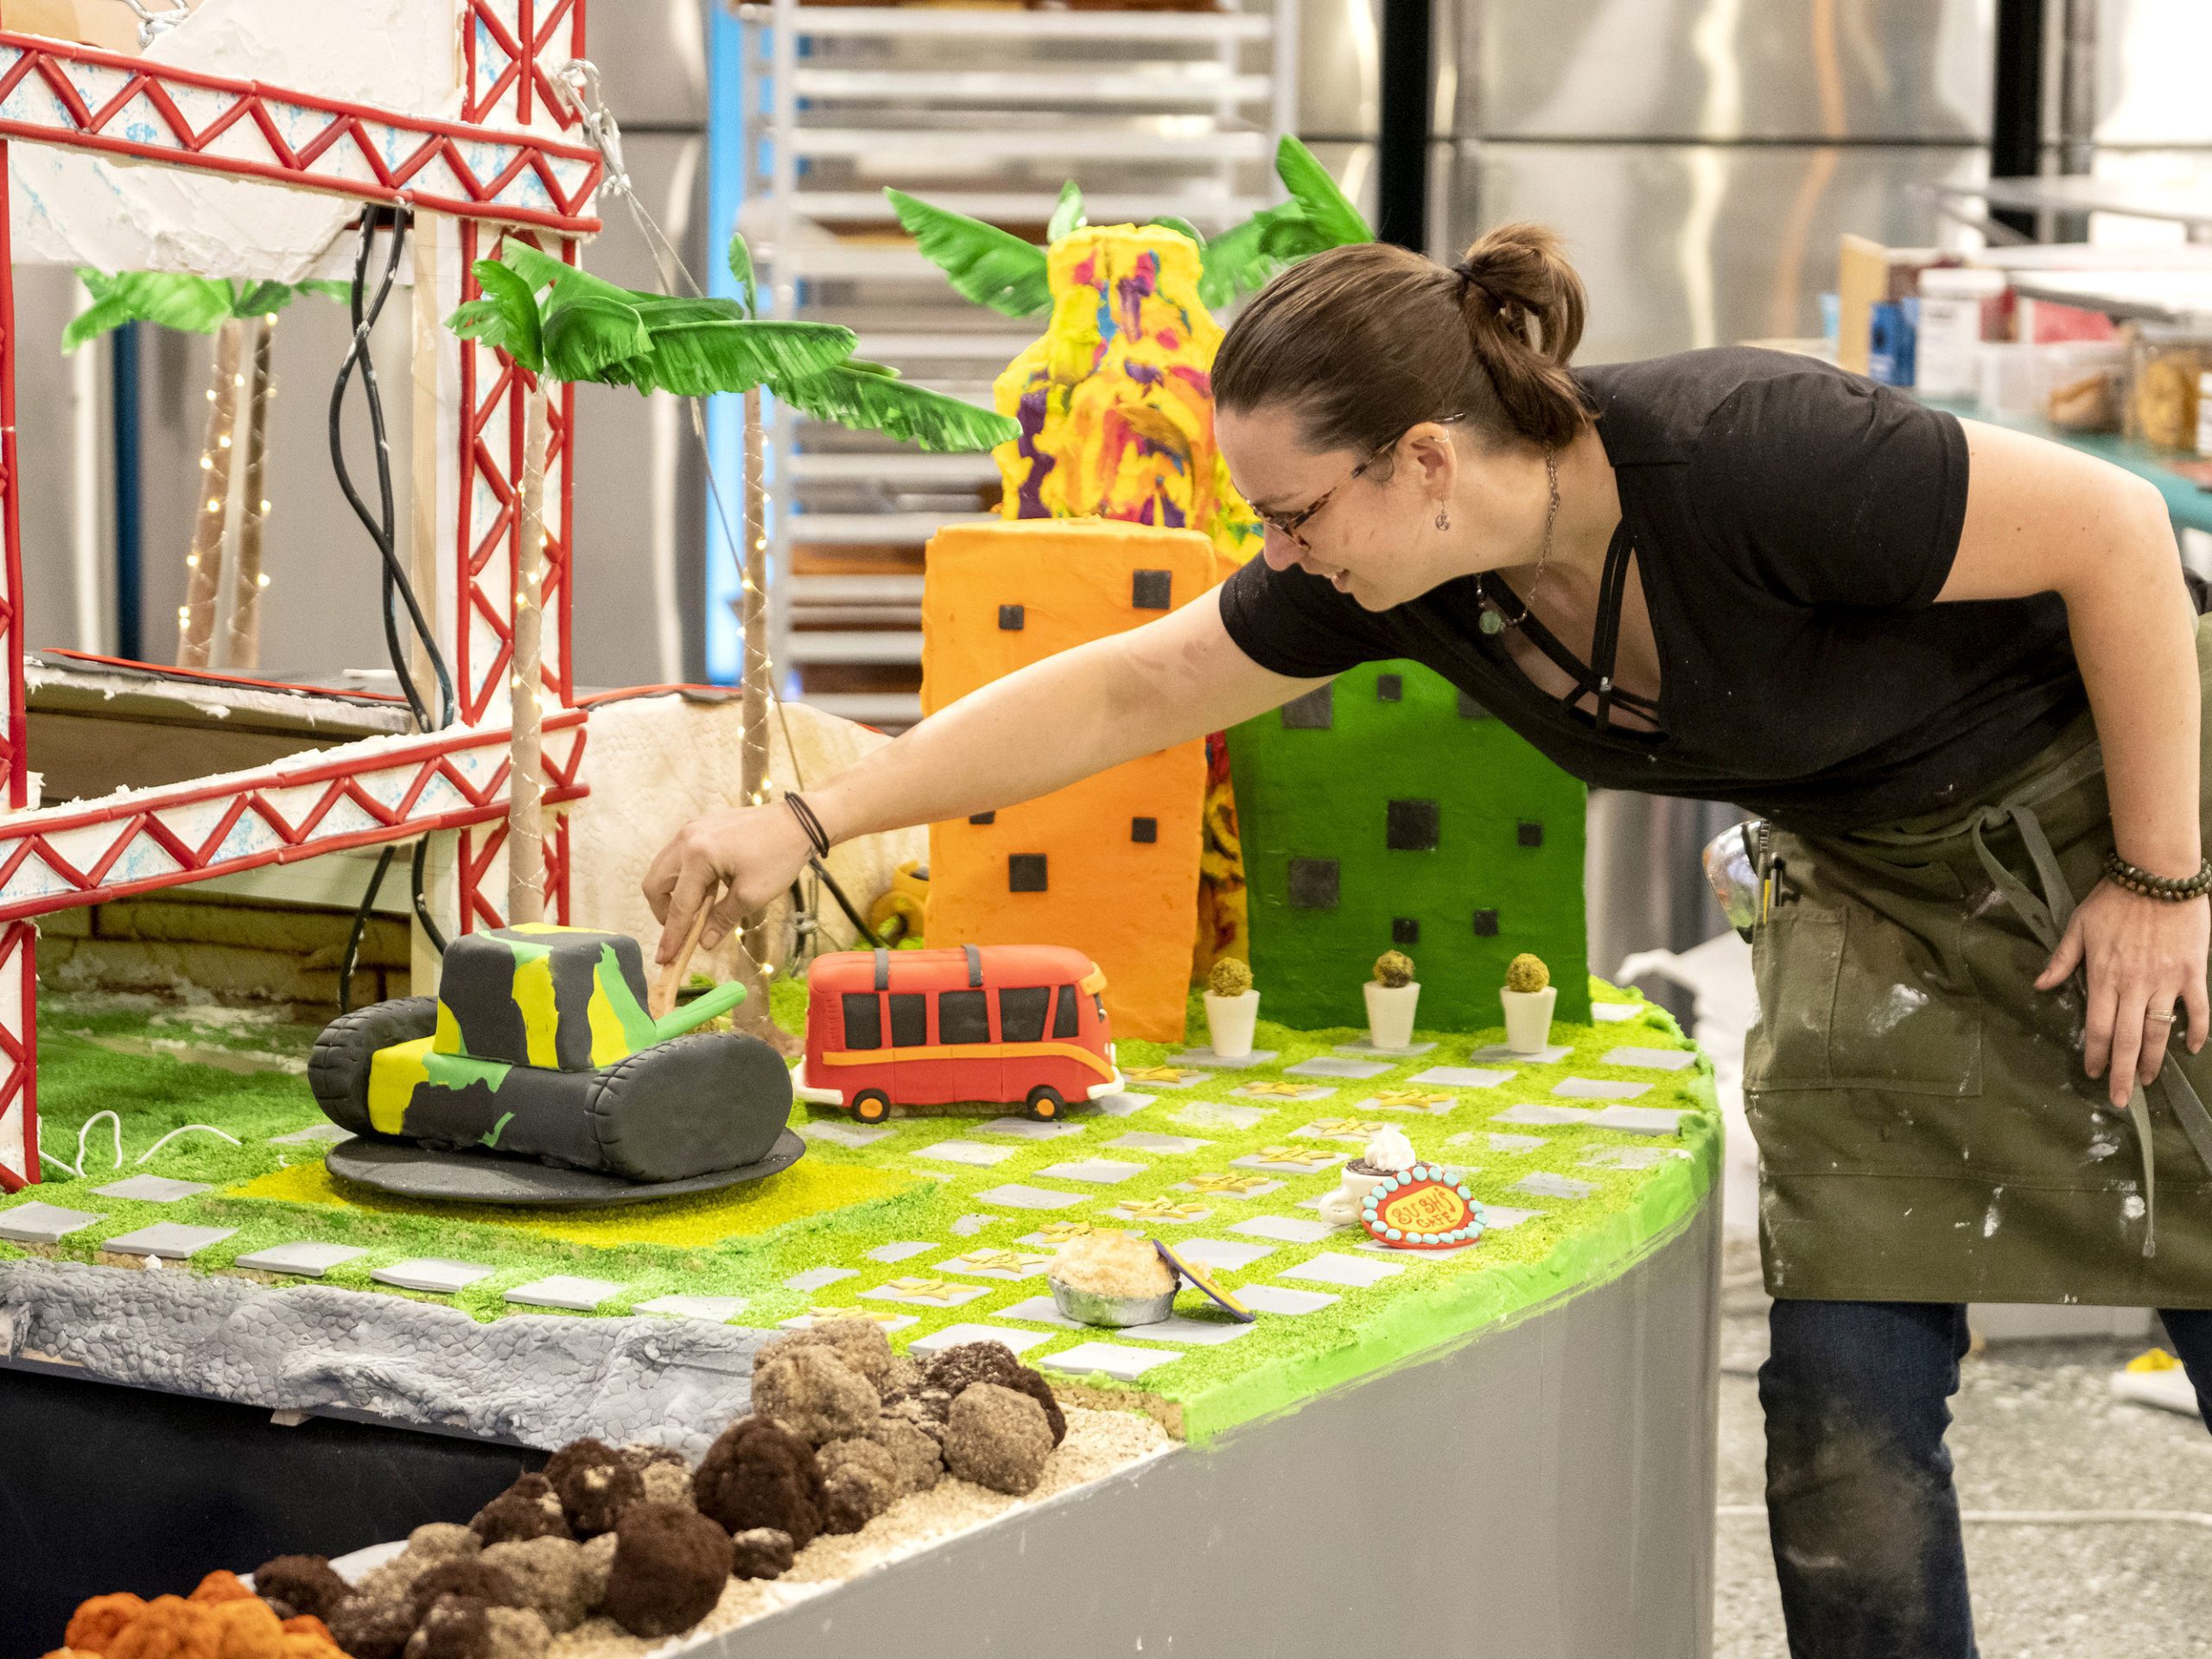 Schonour puts final touches on her team's grand finale creation. The massive bake/build had to include an edible bridge that moves to allow a boat to travel under it, could withstand a car being driven over it, and could hold up to 250 pounds of weight